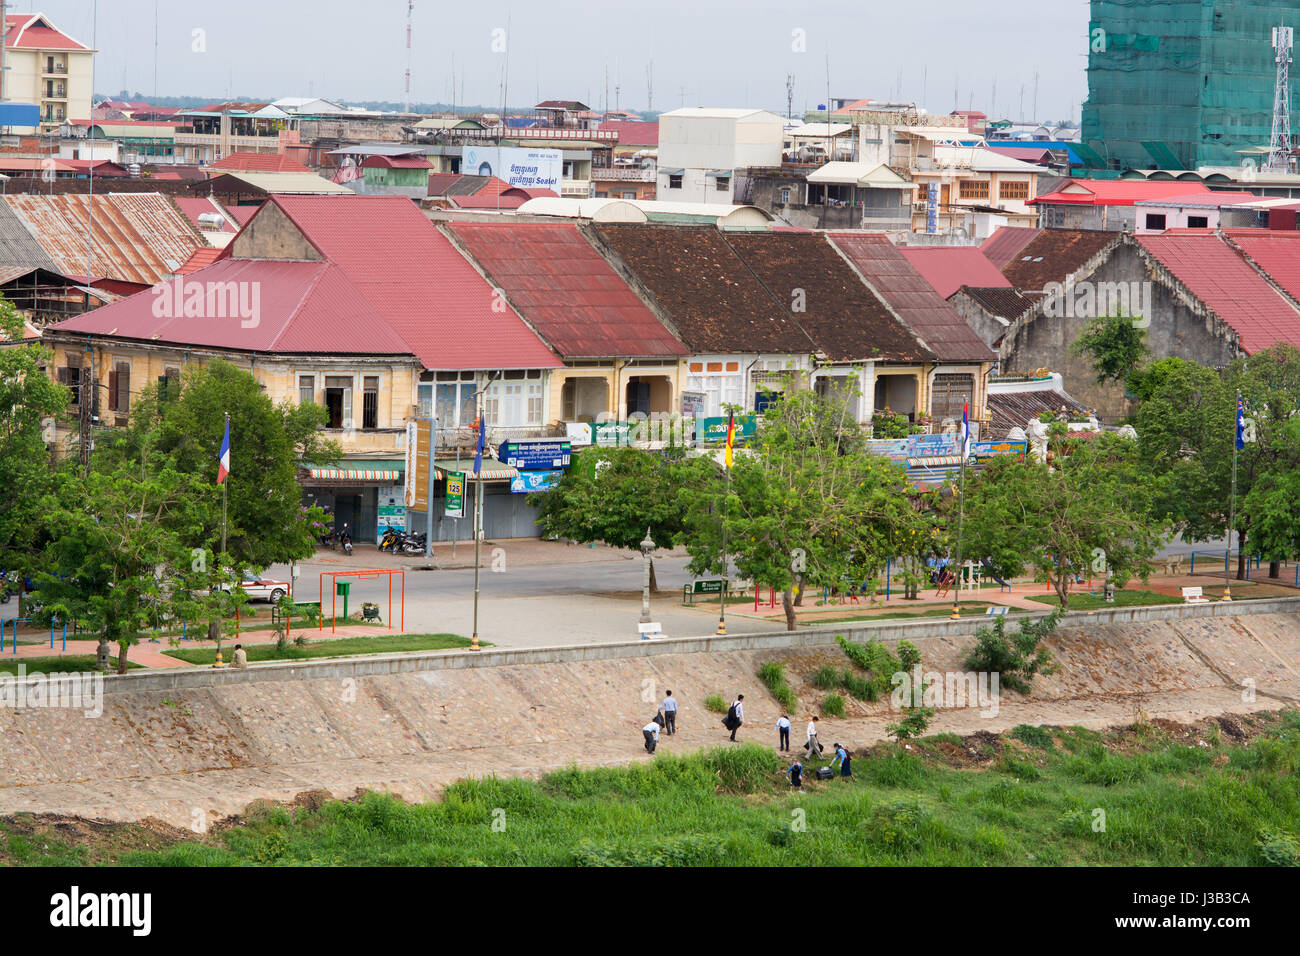 Battambang, Cambodia. 5th May, 2017. School children picking up waste along the historic river front street in Battambang city in Cambodia. The city of Battambang is running a campaign to clean up the city and promote tourism in Cambodia. Credit: Arky/Alamy Live News Stock Photo